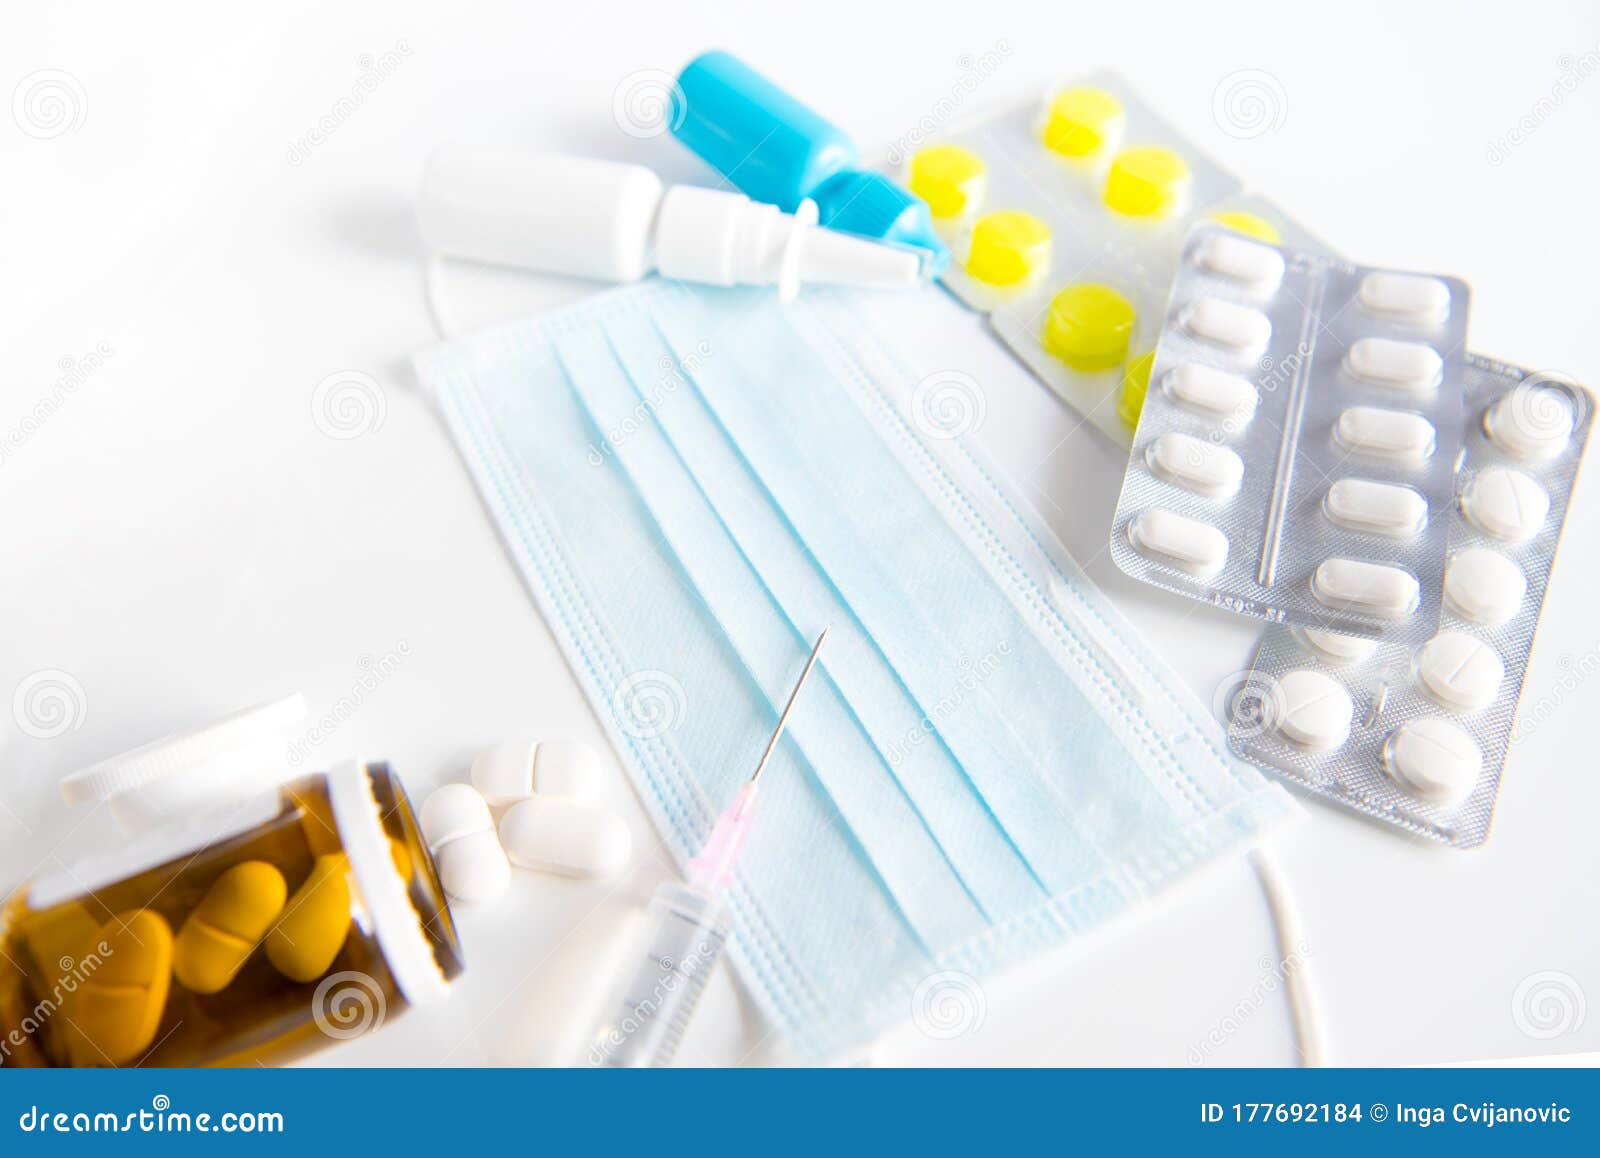 spray, pills, drops and syringe on white background.